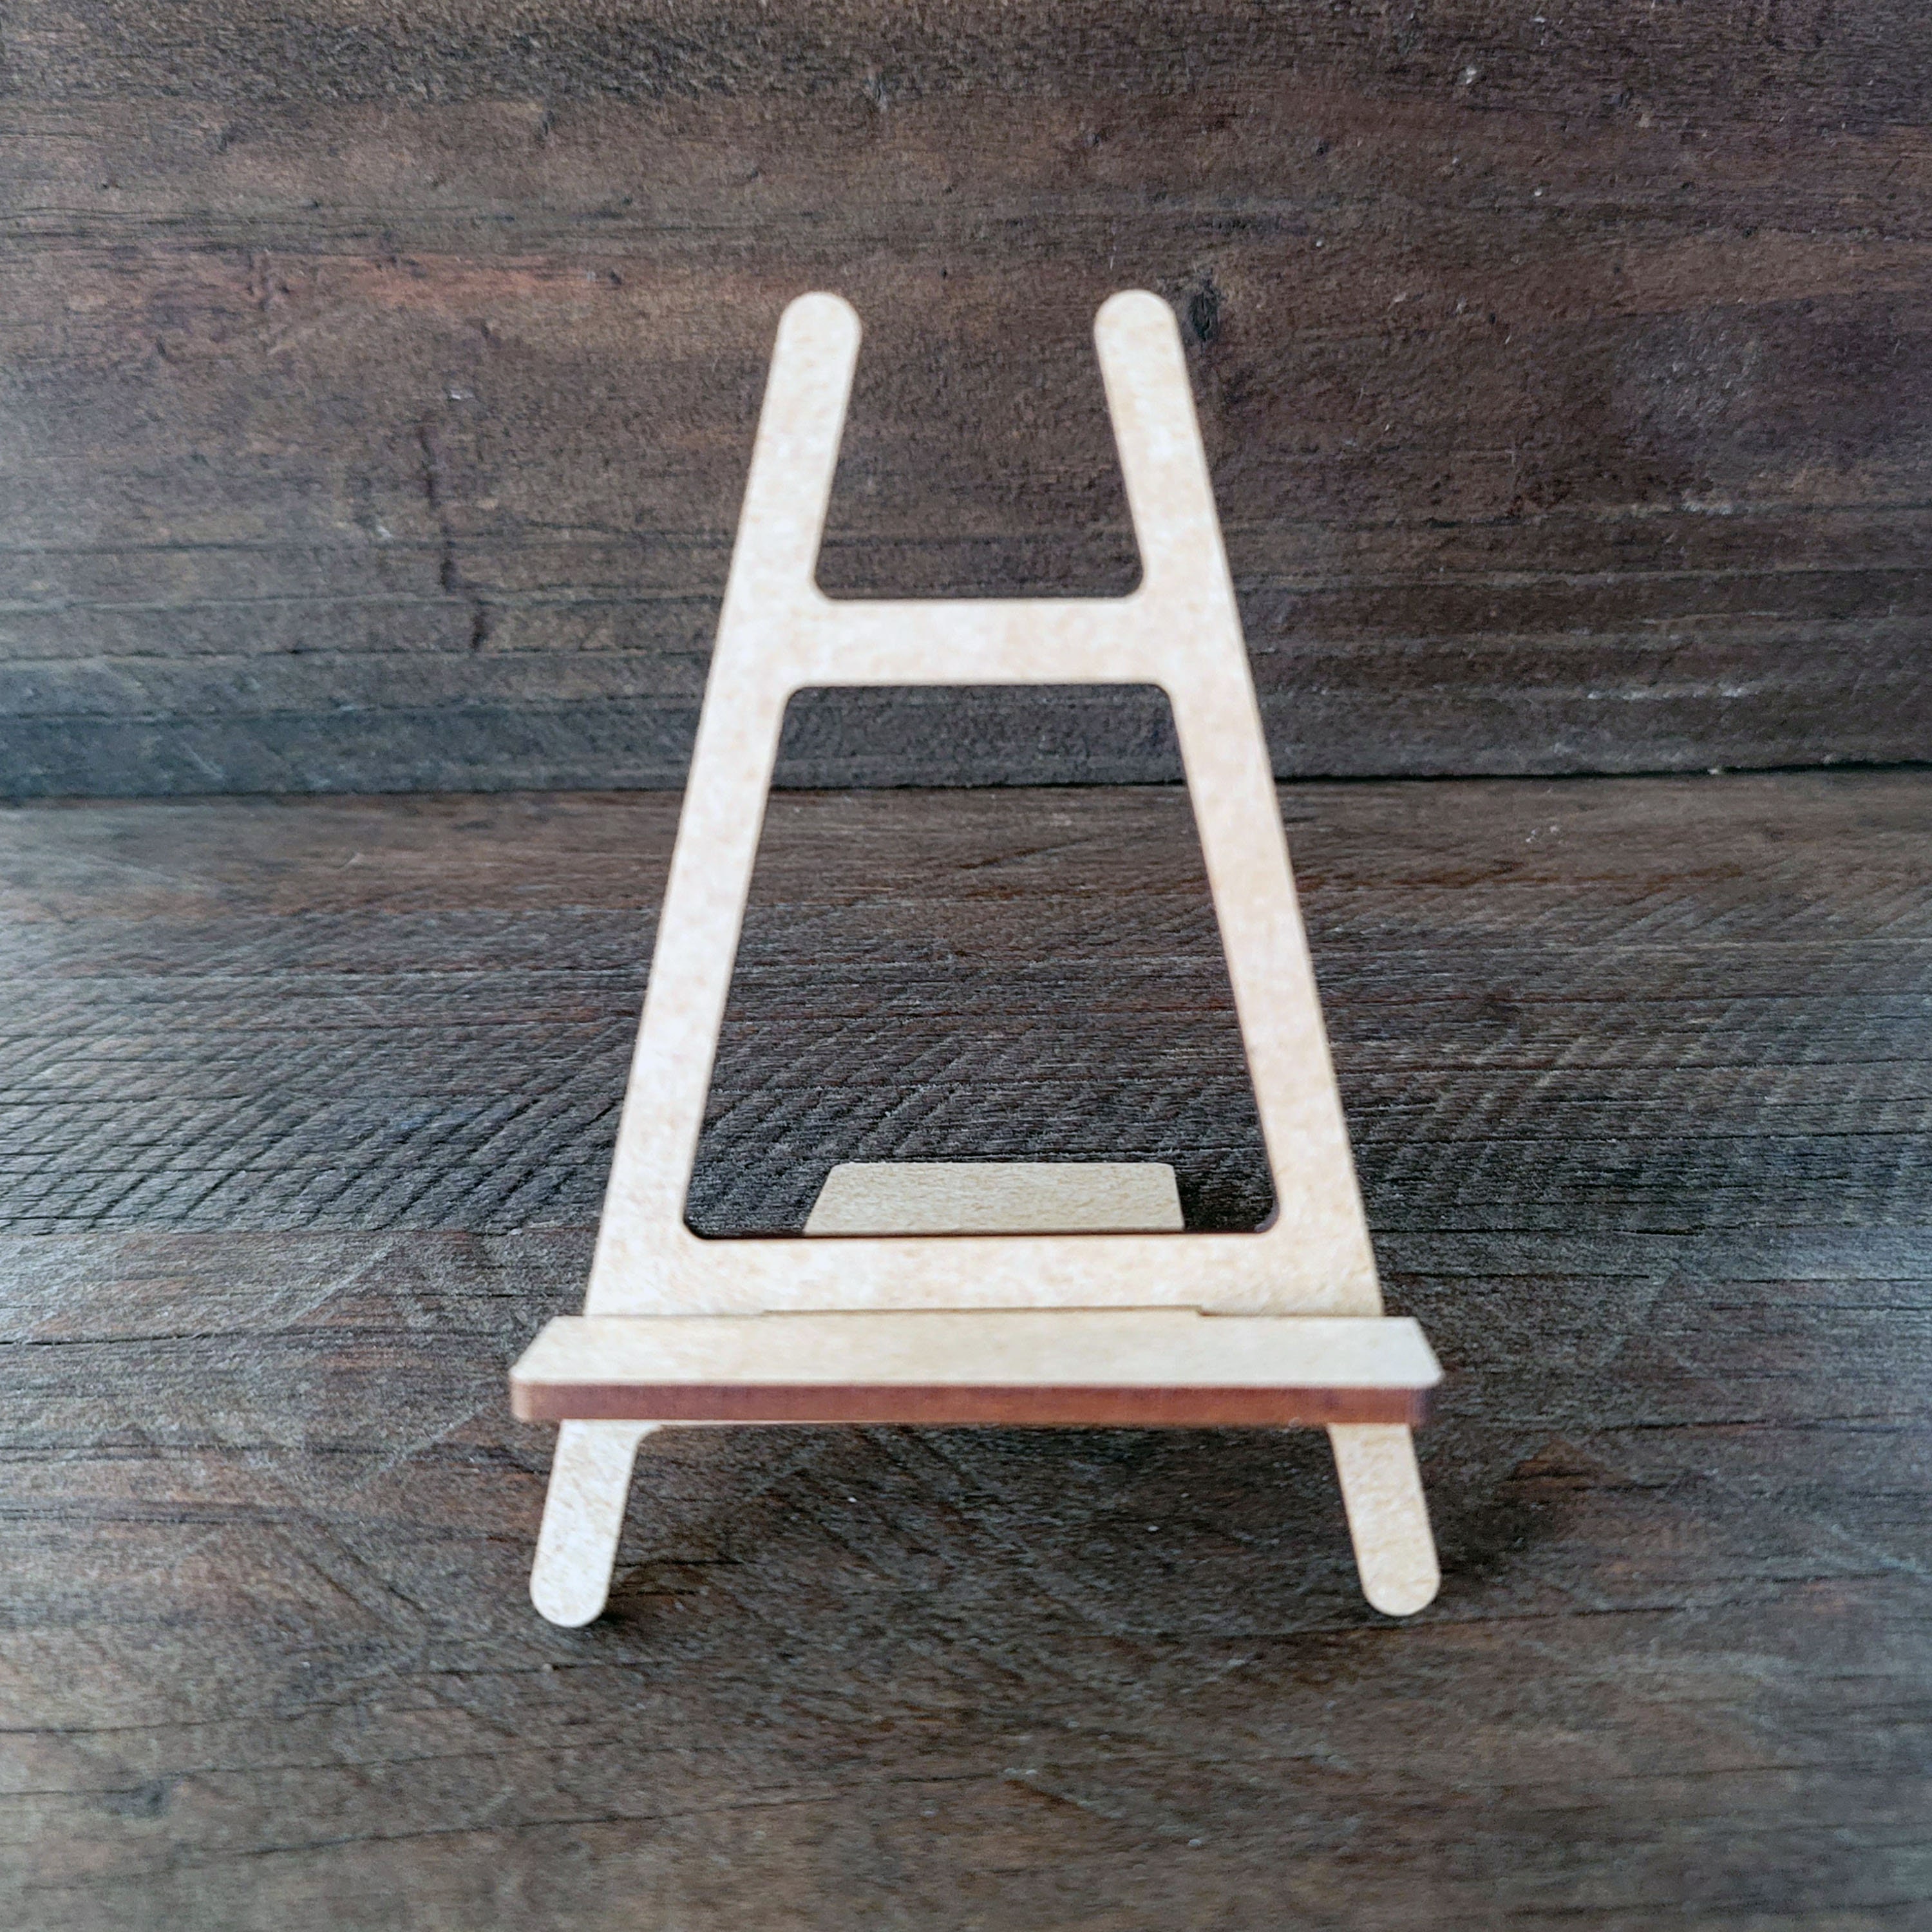 Mini Wooden Frames Paintings, Small Wooden Easel Table